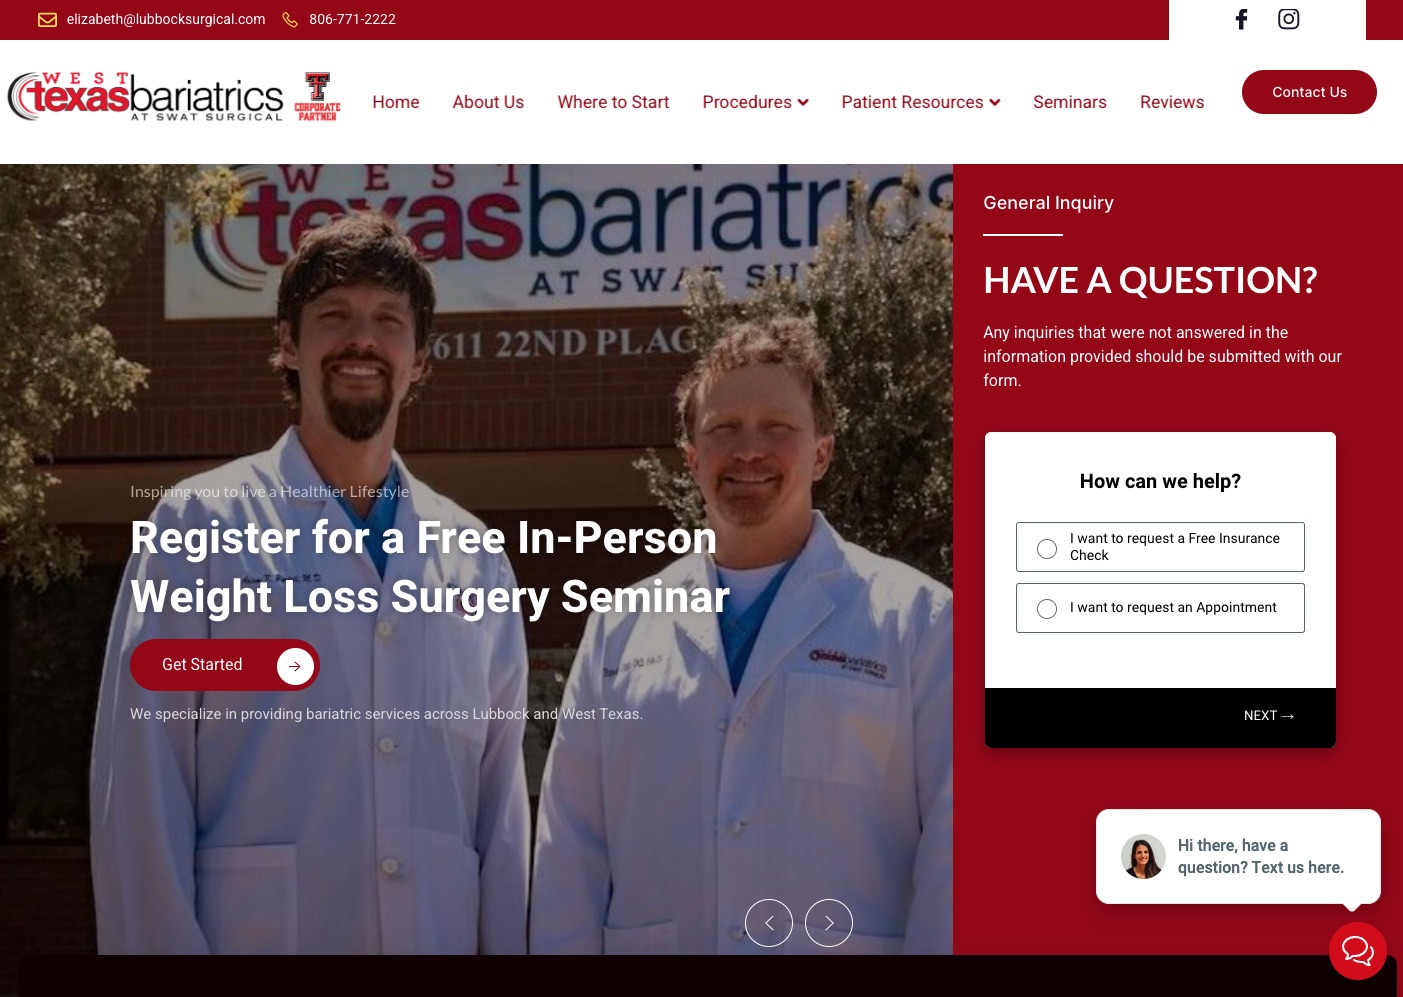 West Texas Bariatrics on cre8ive website